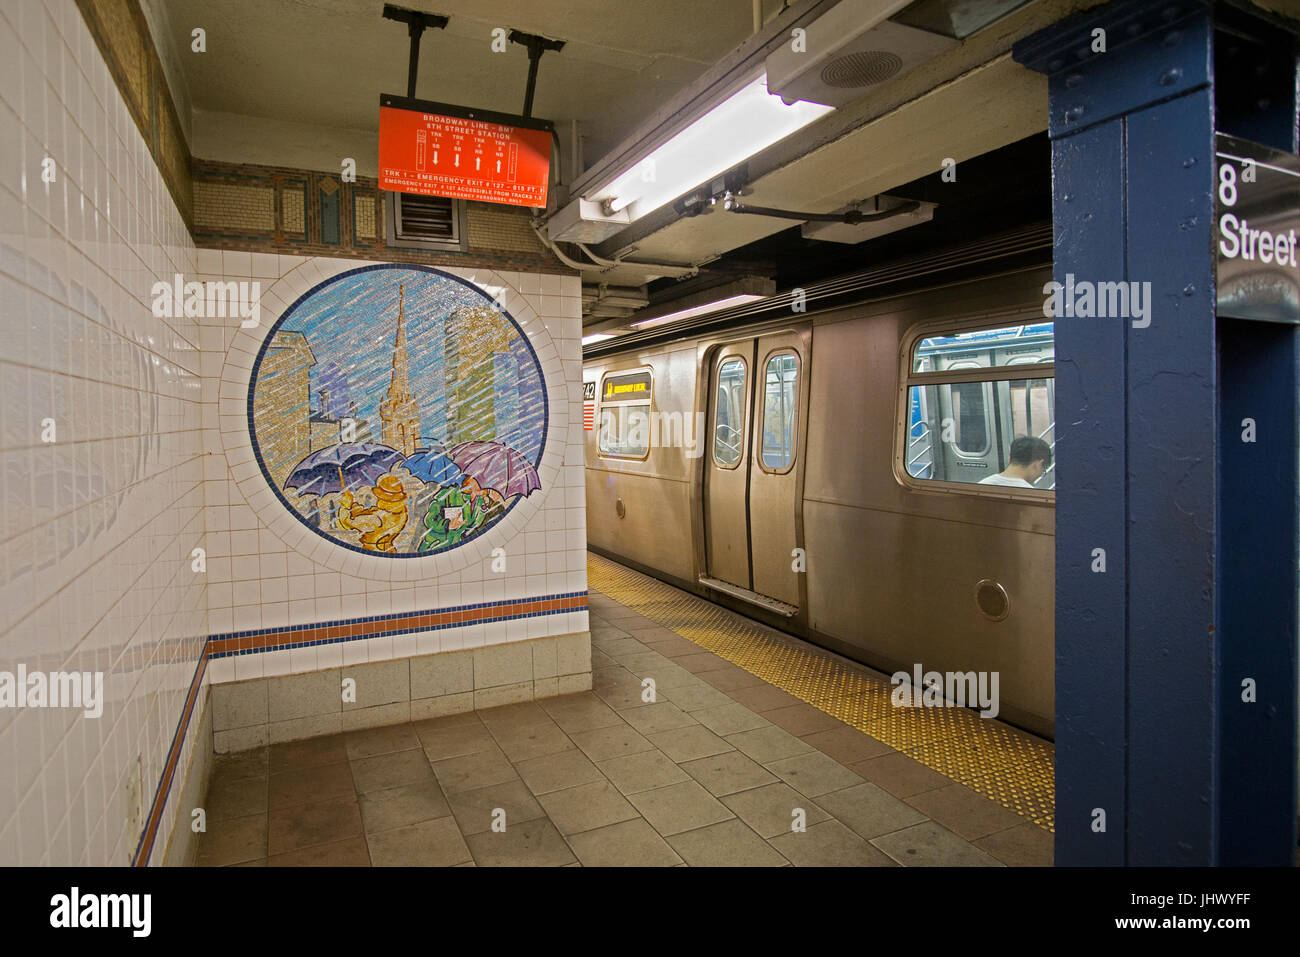 Subway art and a train at the 8th Street station of the R and N lines on Broadway and 8th Street in Greenwich Village in New York City. Stock Photo